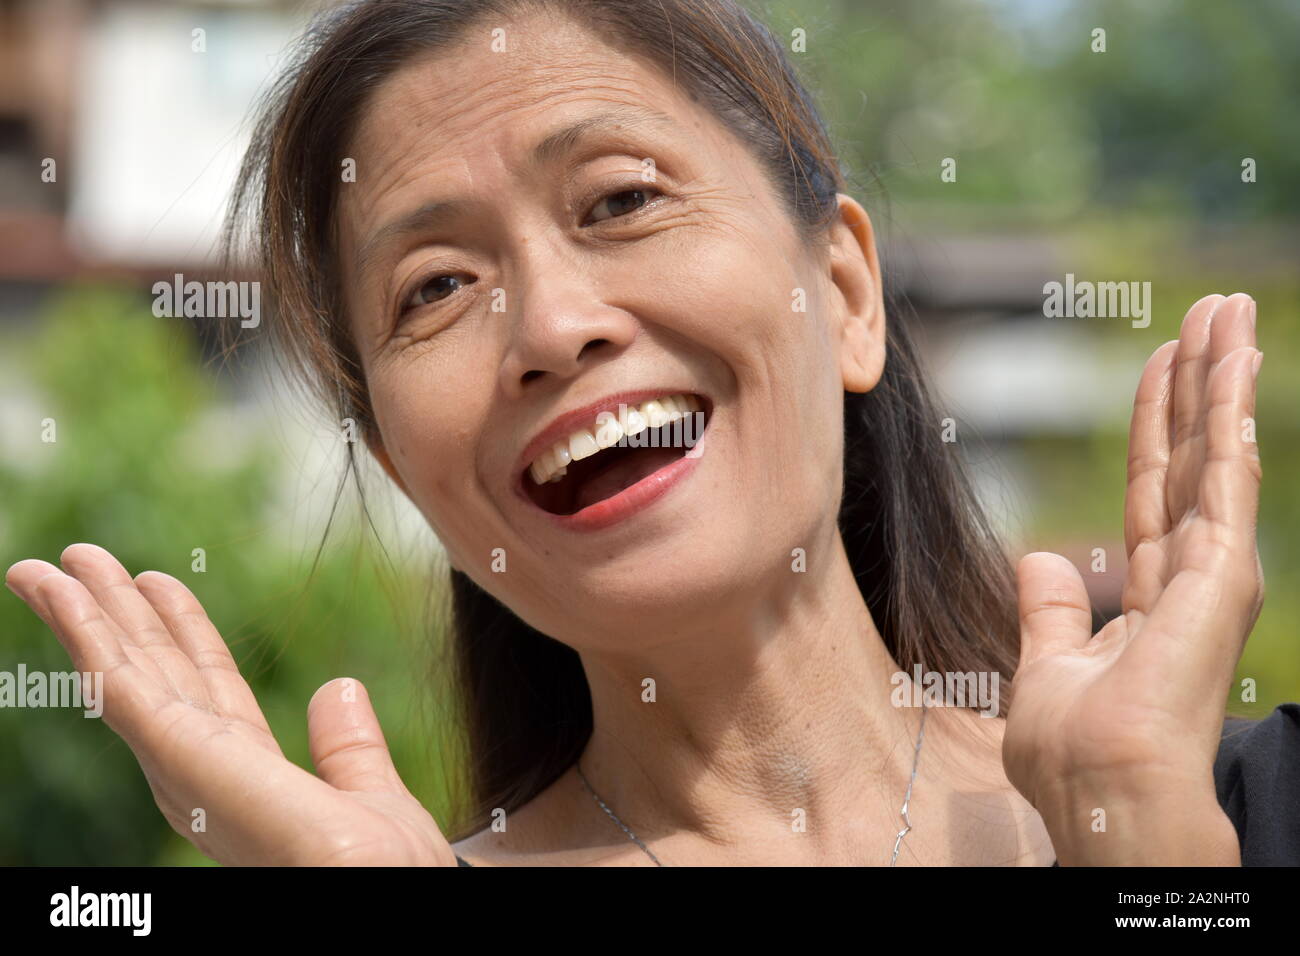 A Surprised Adult Female Stock Photo